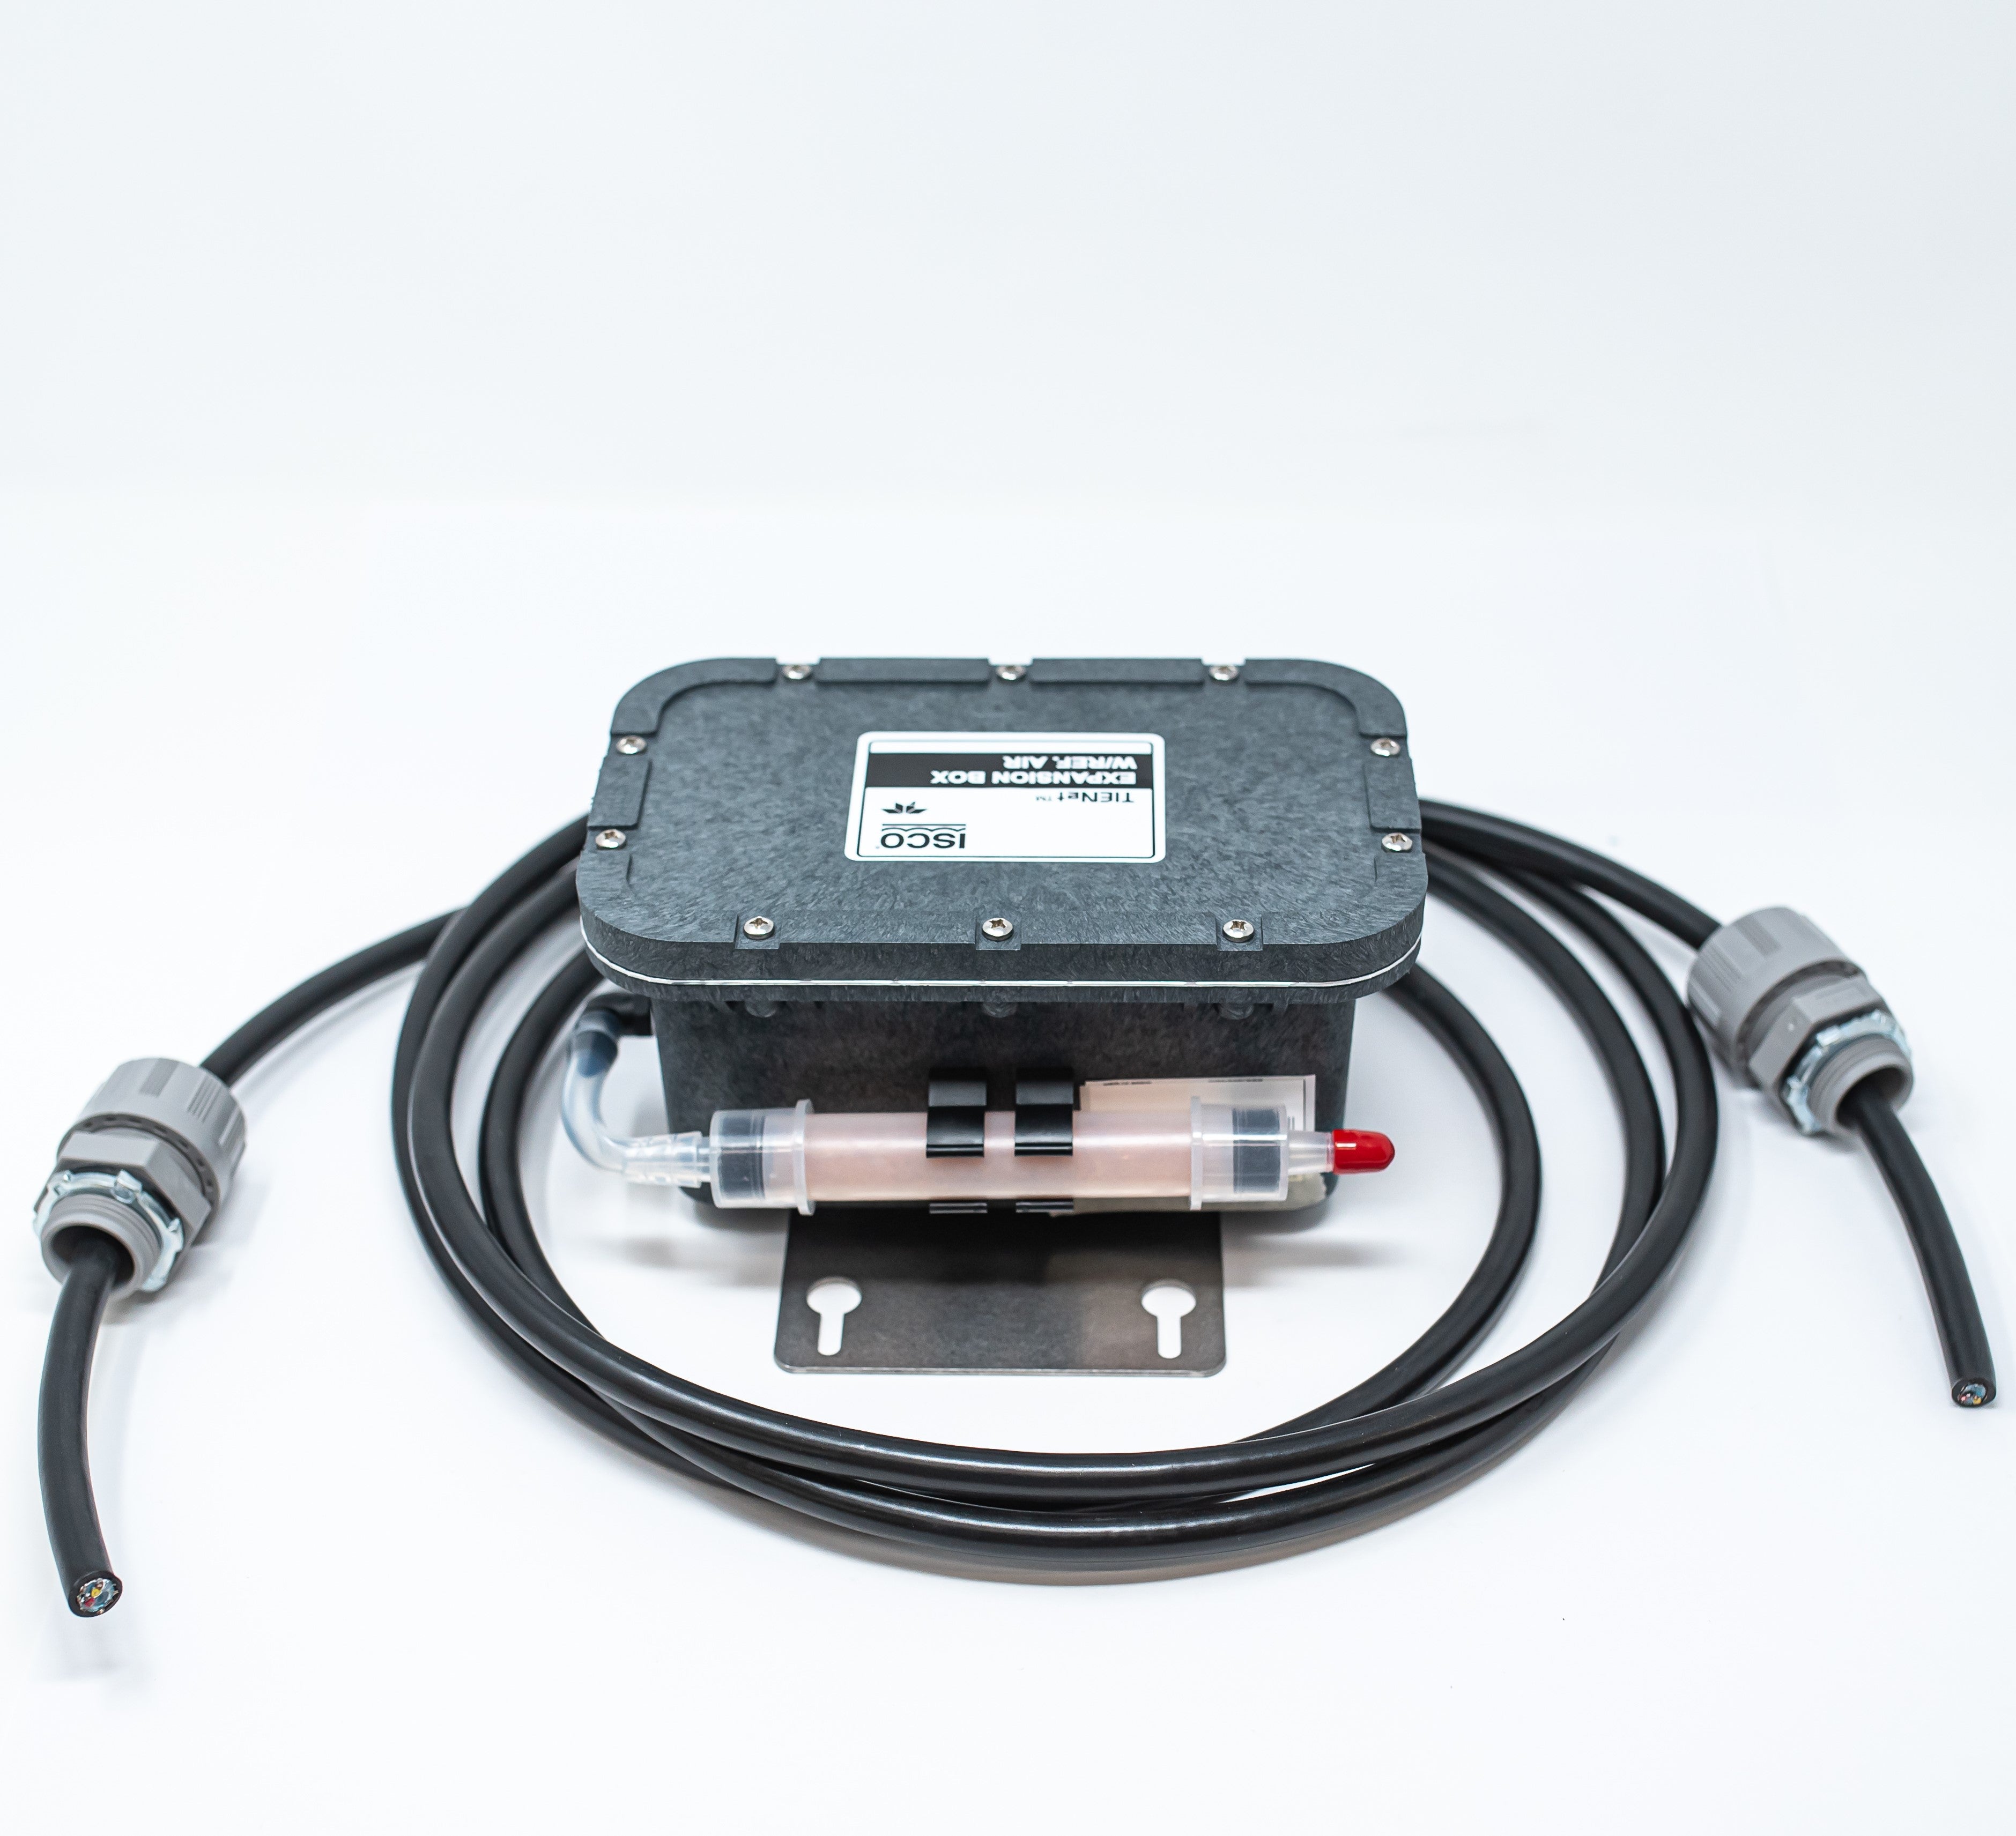 TIENet™ Network Expansion Box with 10 Ft. Cable and Desiccator